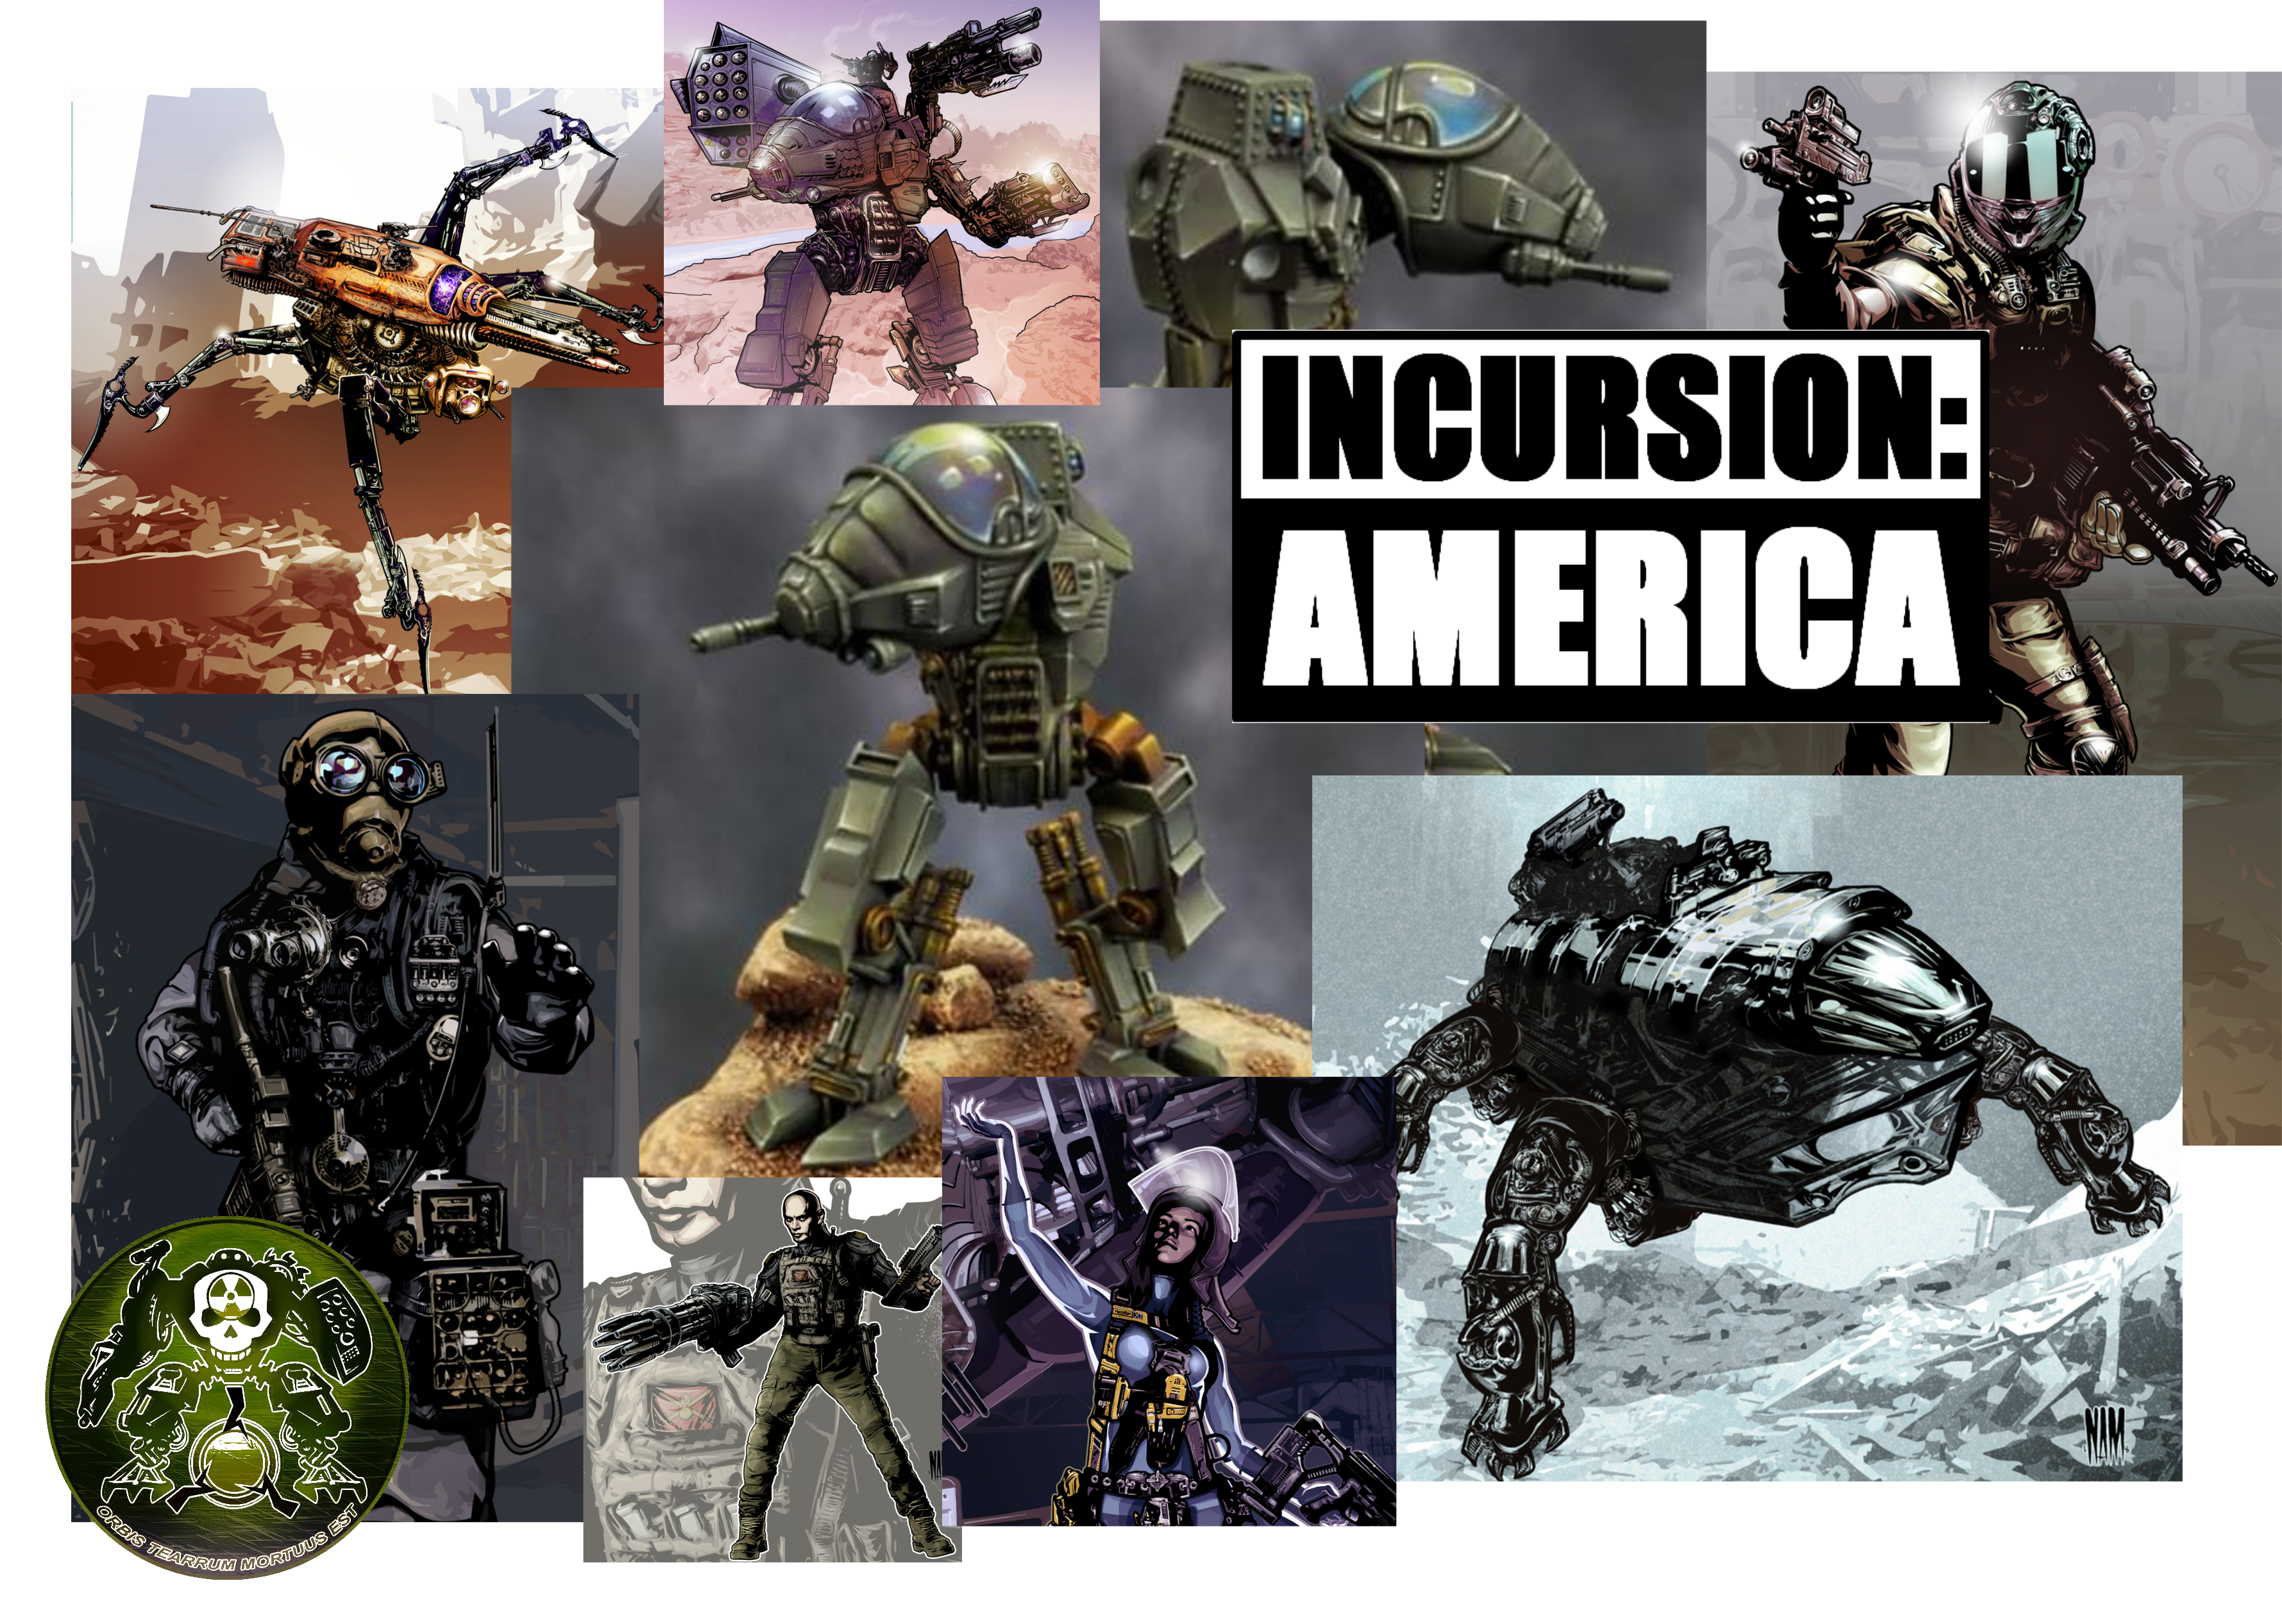 WHAT IS INCURSION: AMERICA?